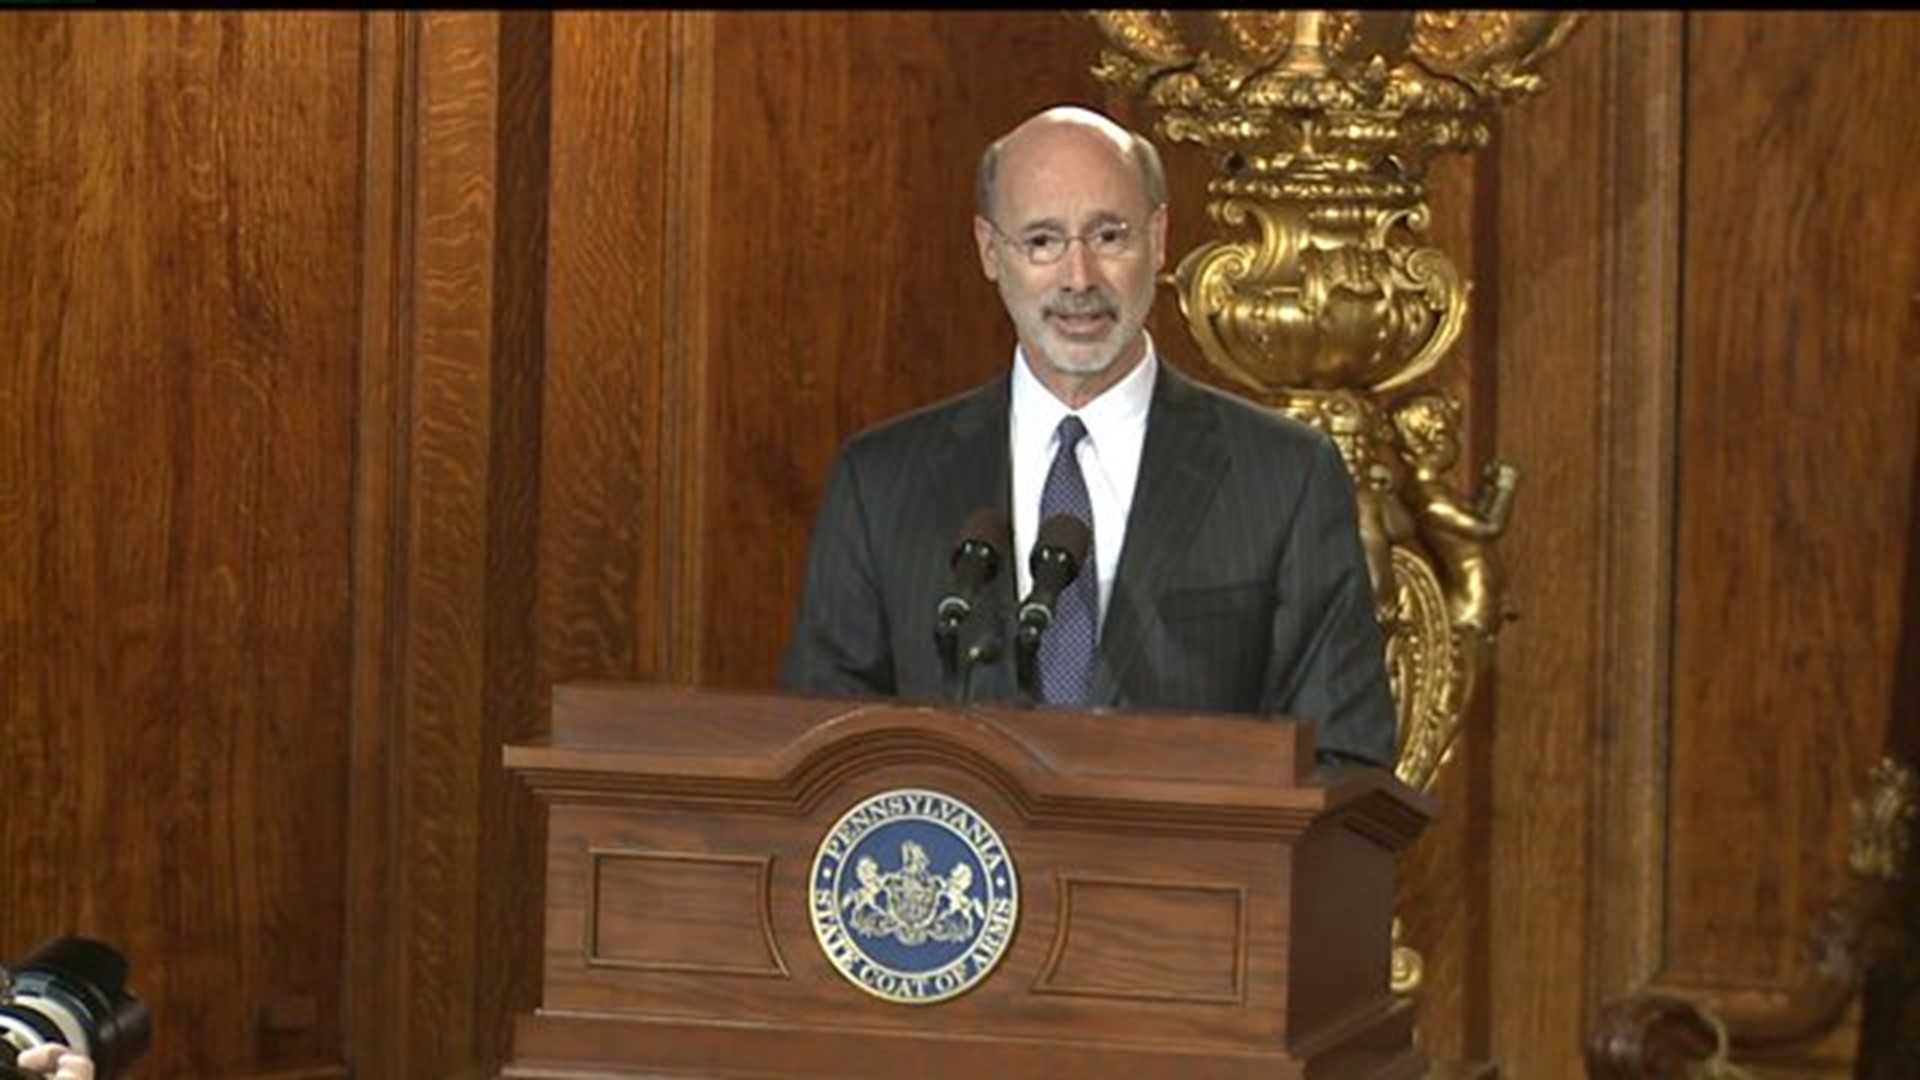 Gov. Wolf established Office of Transformation, Innovation, Management and Efficiency